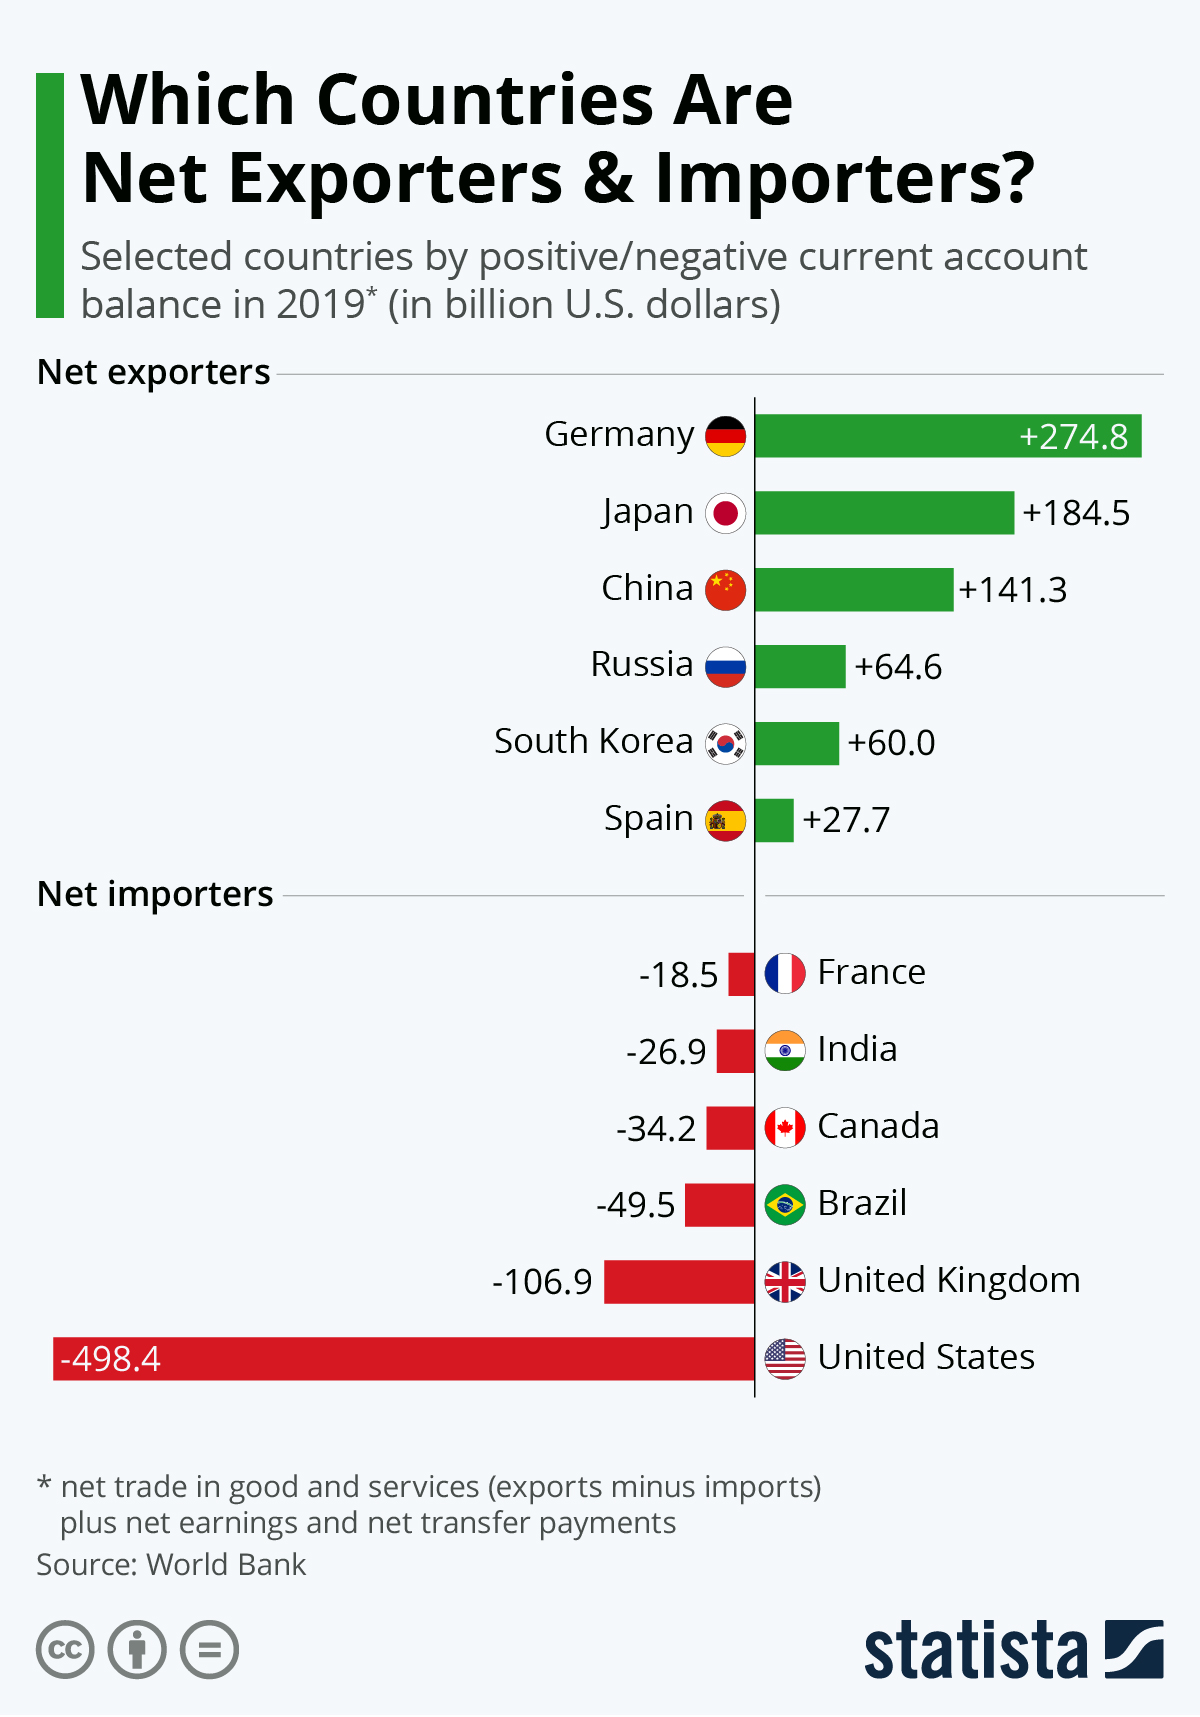 US Net Exporters and Importers